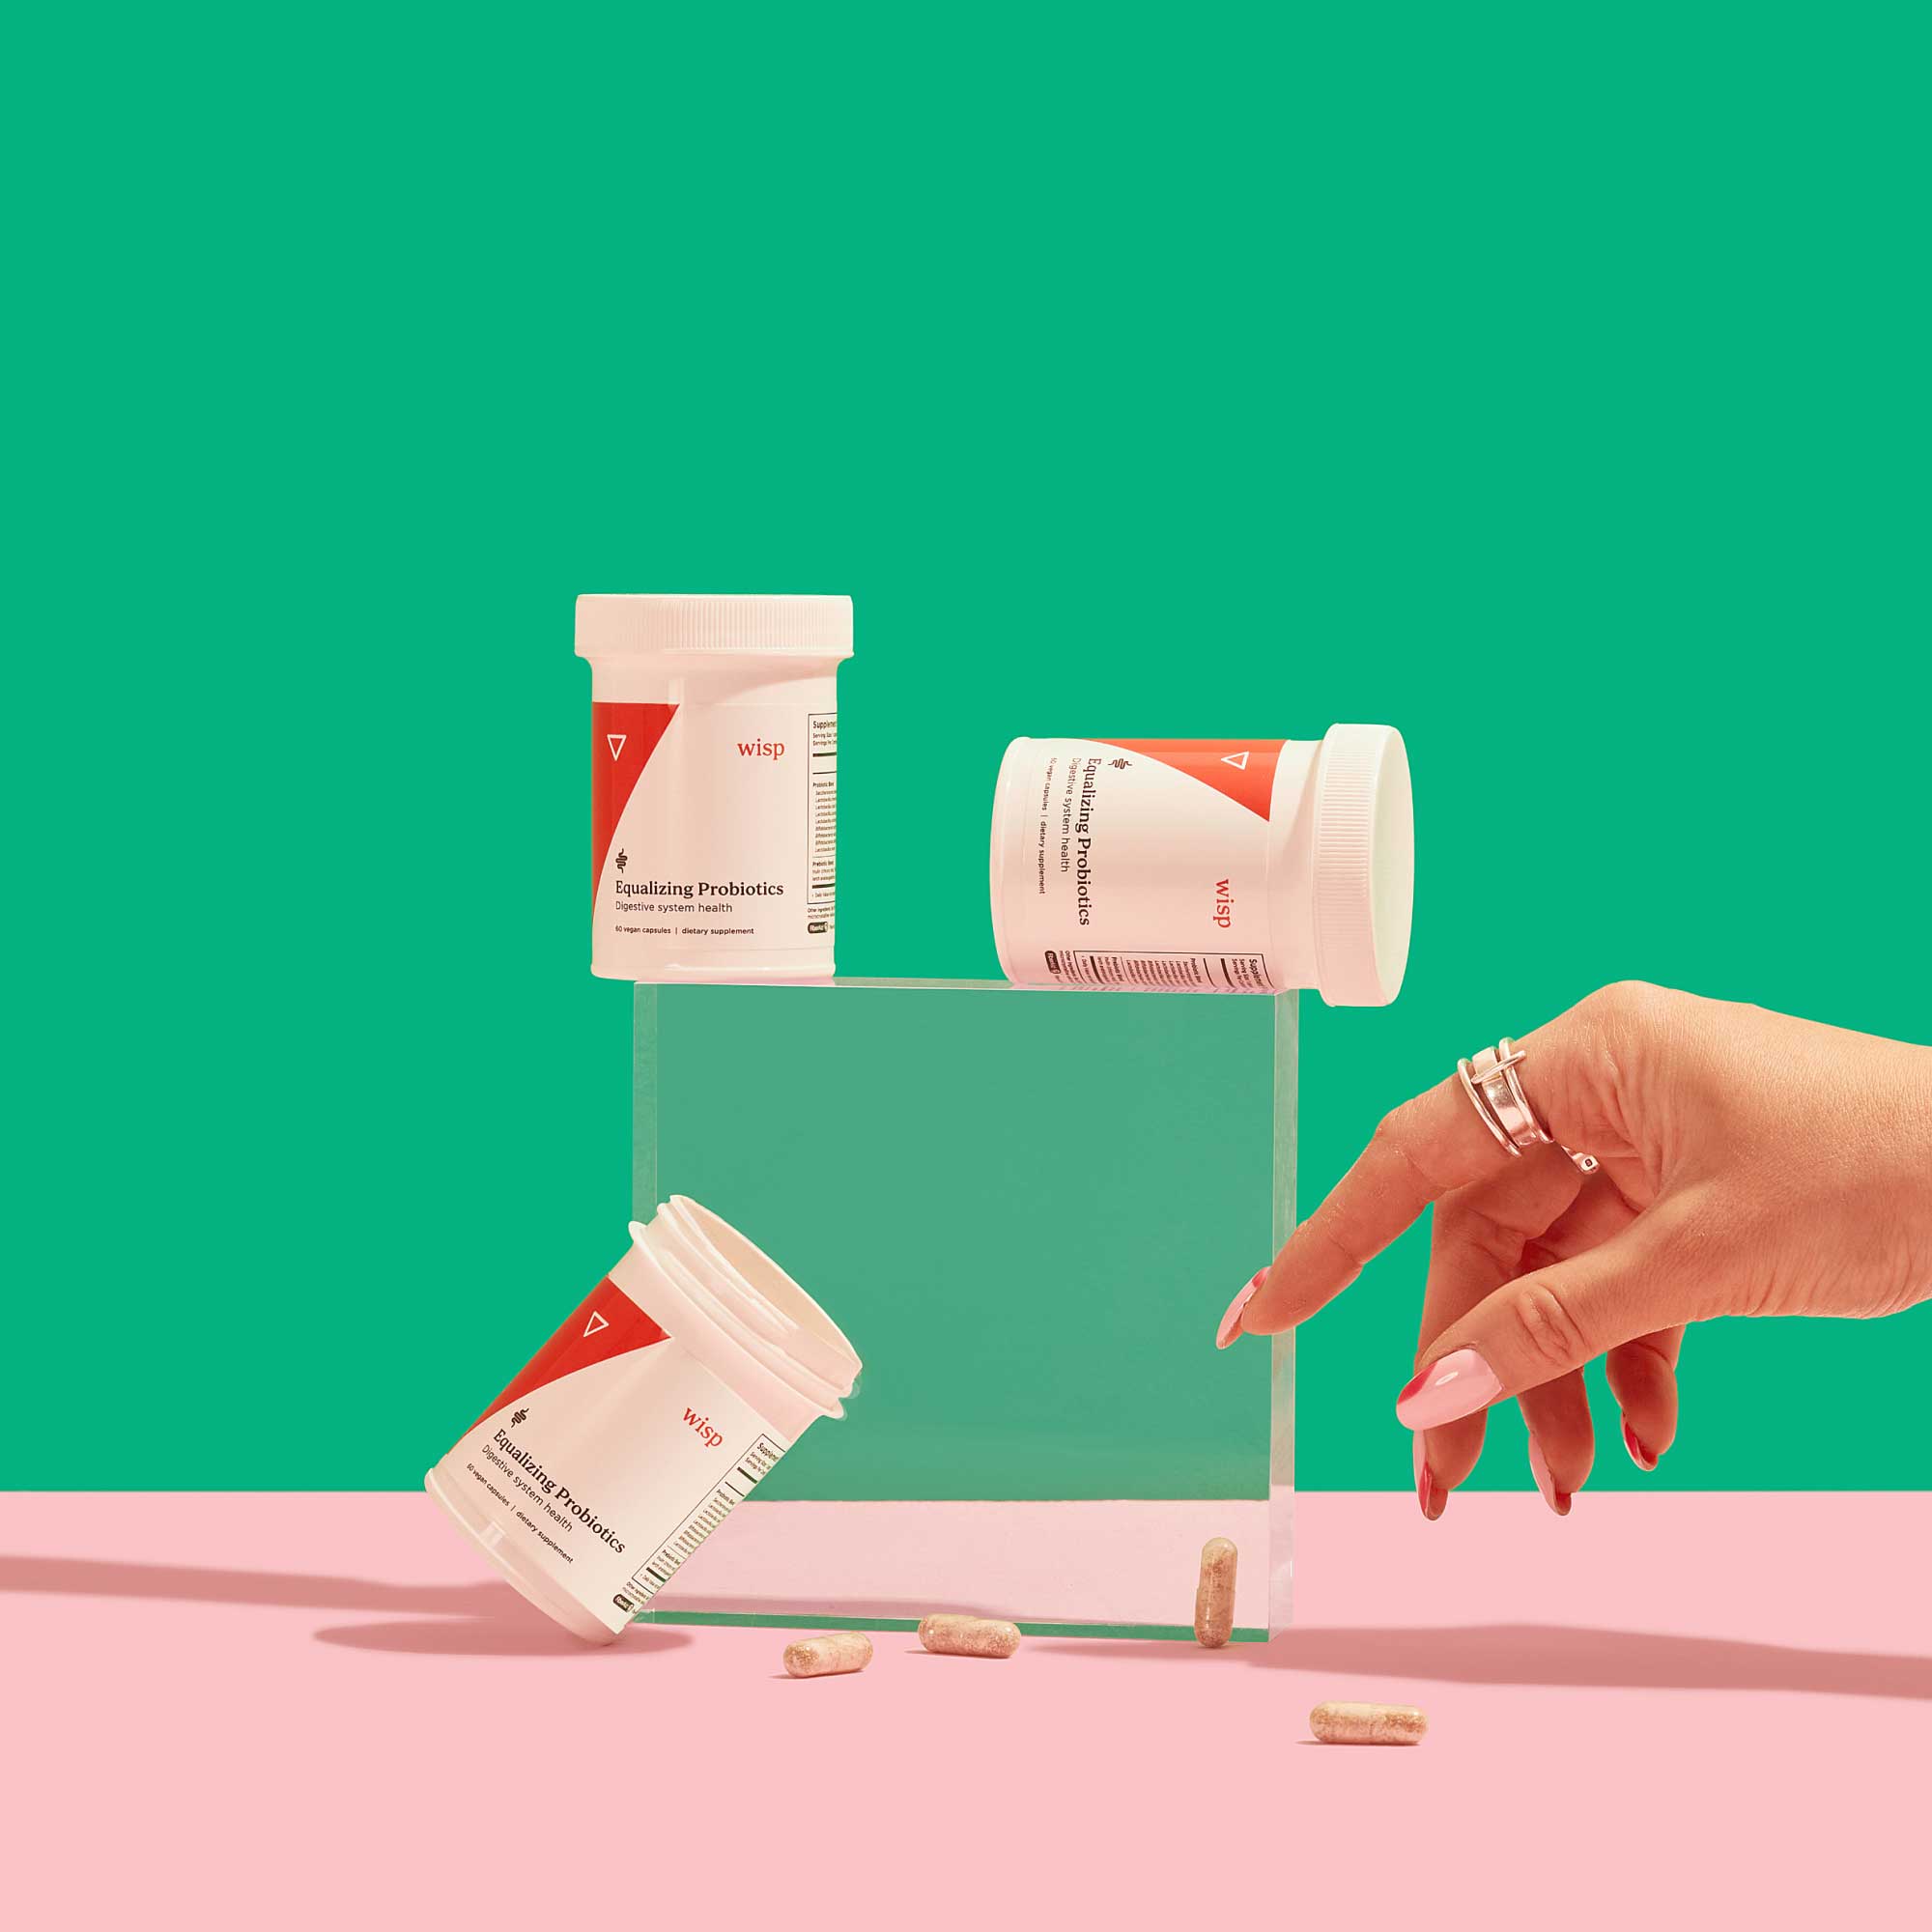 3 bottles of Wisp Equalizing Probiotics balanced on a clear square shape with a woman's hand reaching for spilled pills on a pink surface with a green background